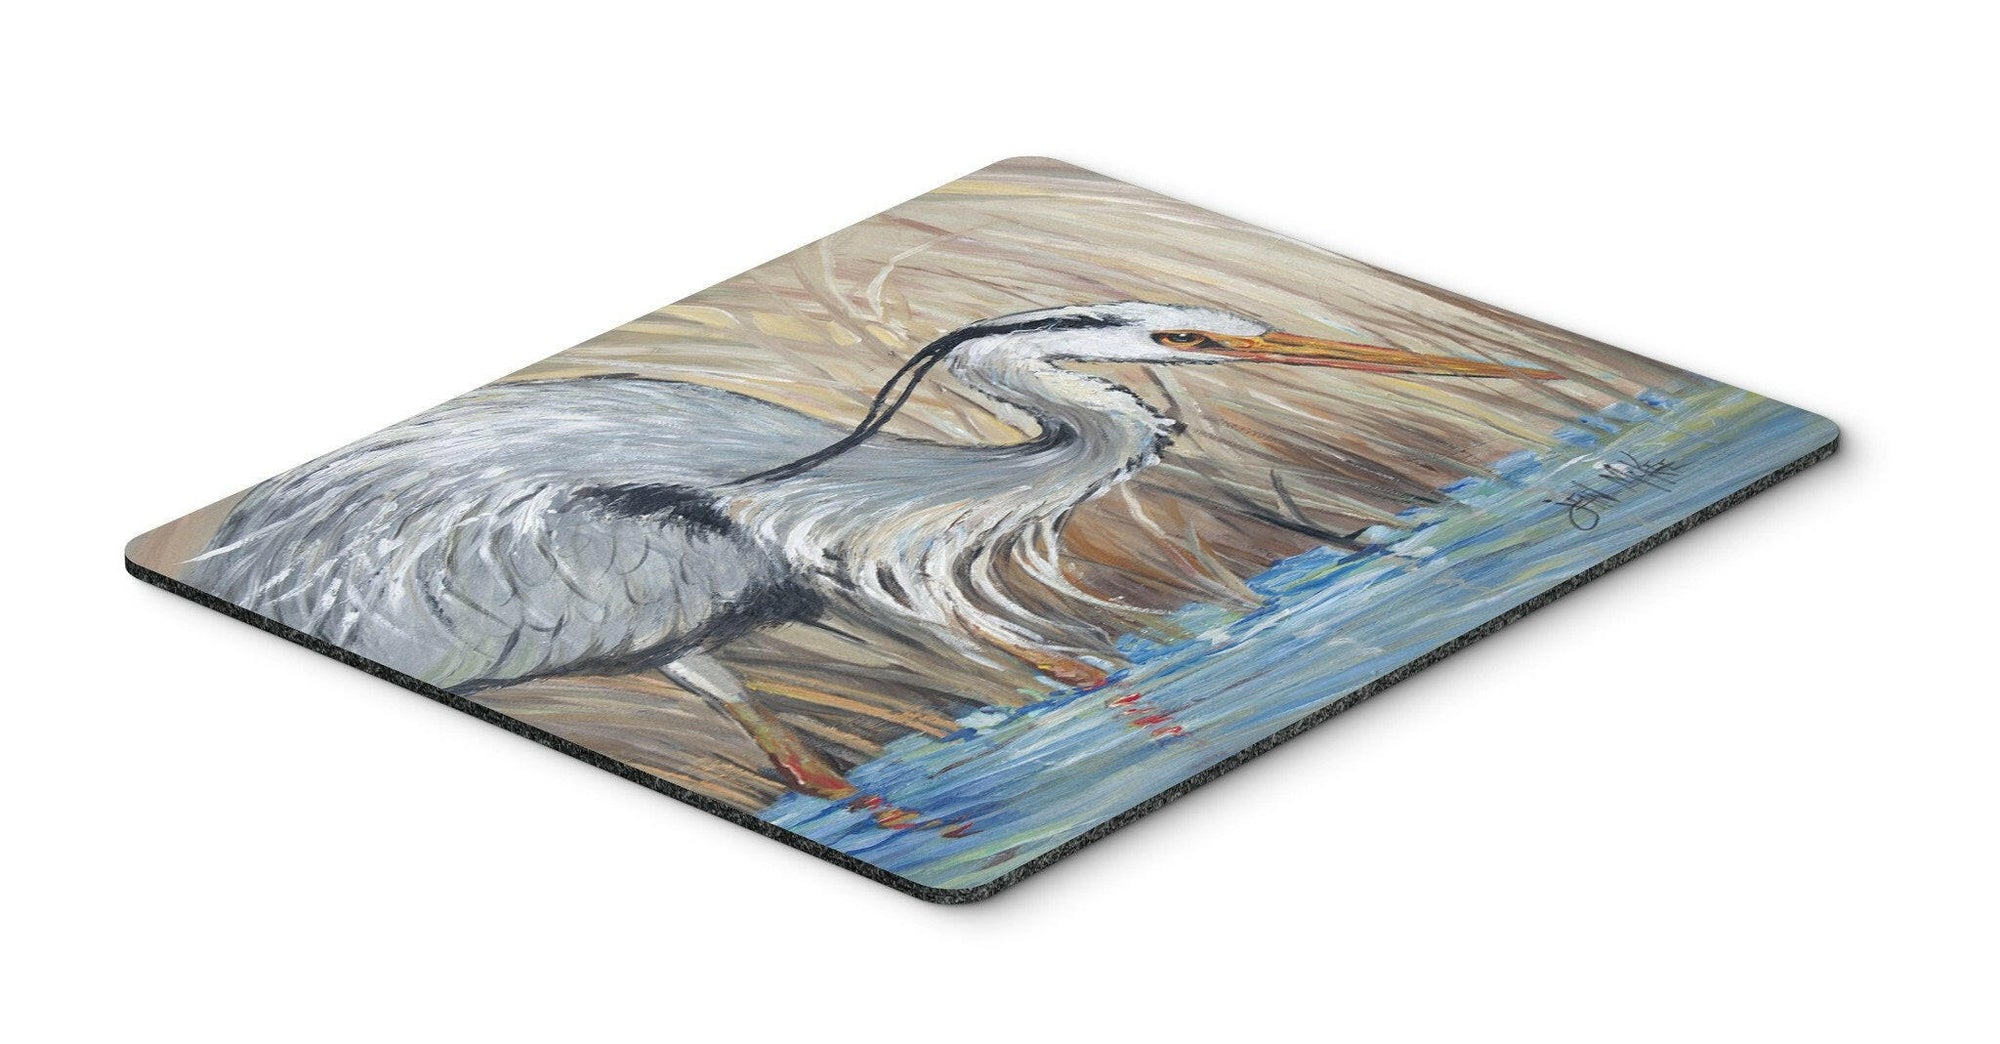 Blue Heron in the reeds Mouse Pad, Hot Pad or Trivet JMK1013MP by Caroline's Treasures